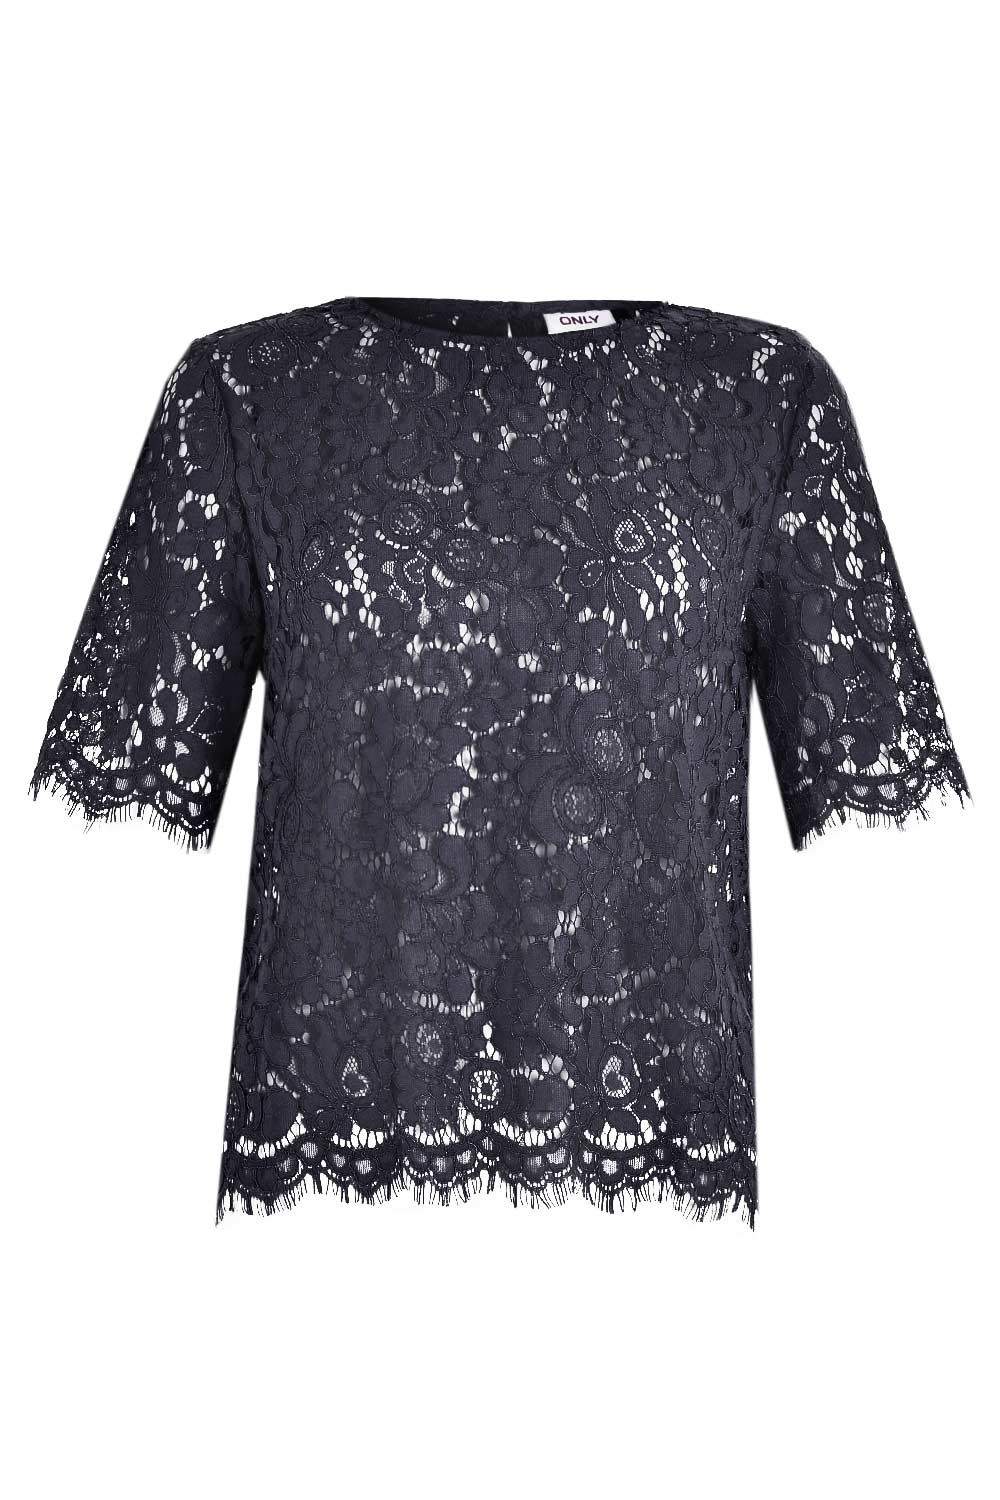 Only Vivian Papla Lace Top in Black | iCLOTHING